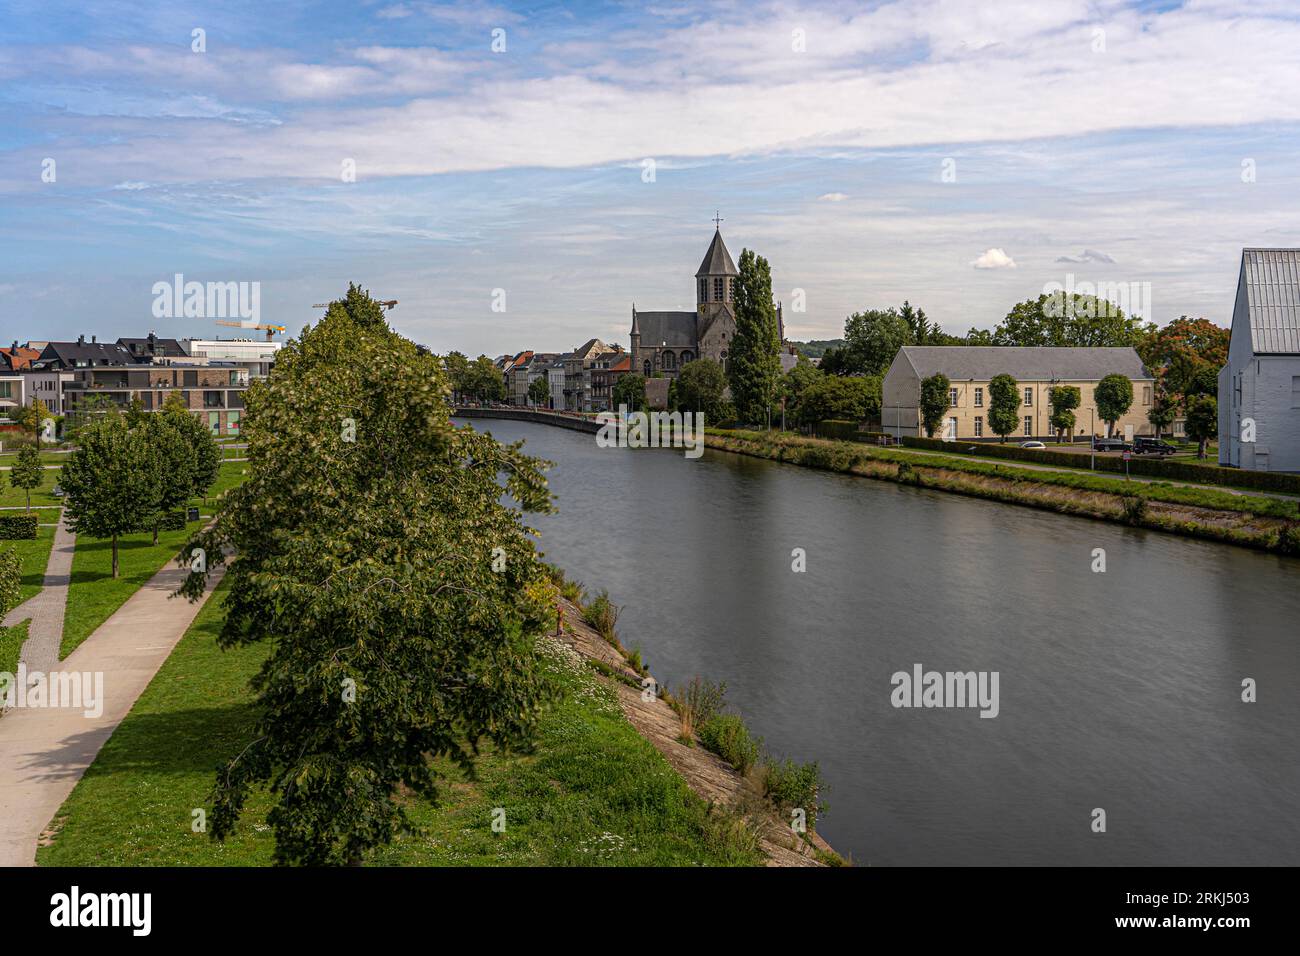 City Oudenaarde name in french Audenarde located in the province Oost-vlaanderen in Belgium.  District Gent.  Famous for tapestry production.  V Stock Photo